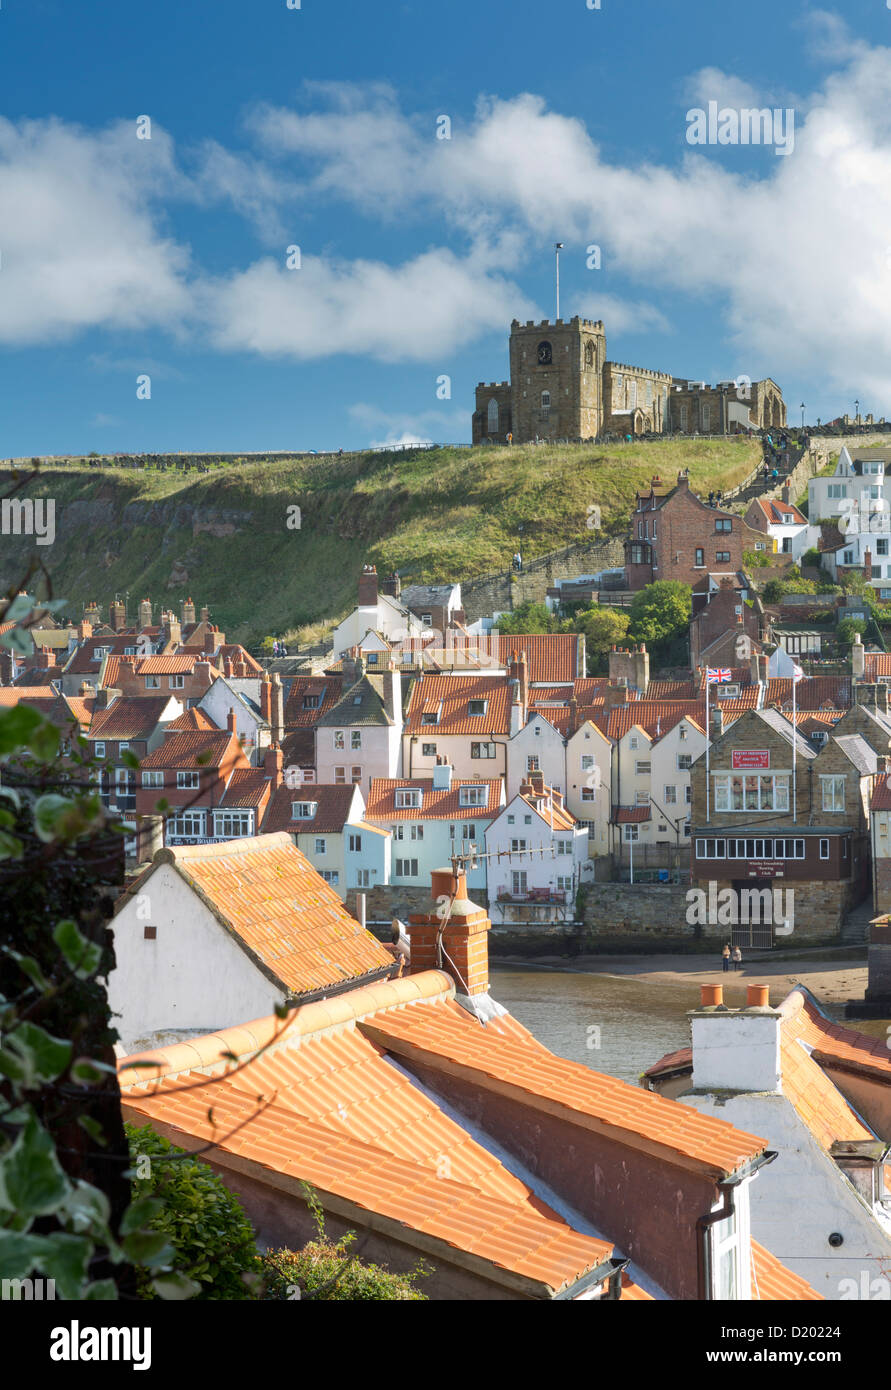 The Church of St Mary, Whitby, across the river Esk. Stock Photo